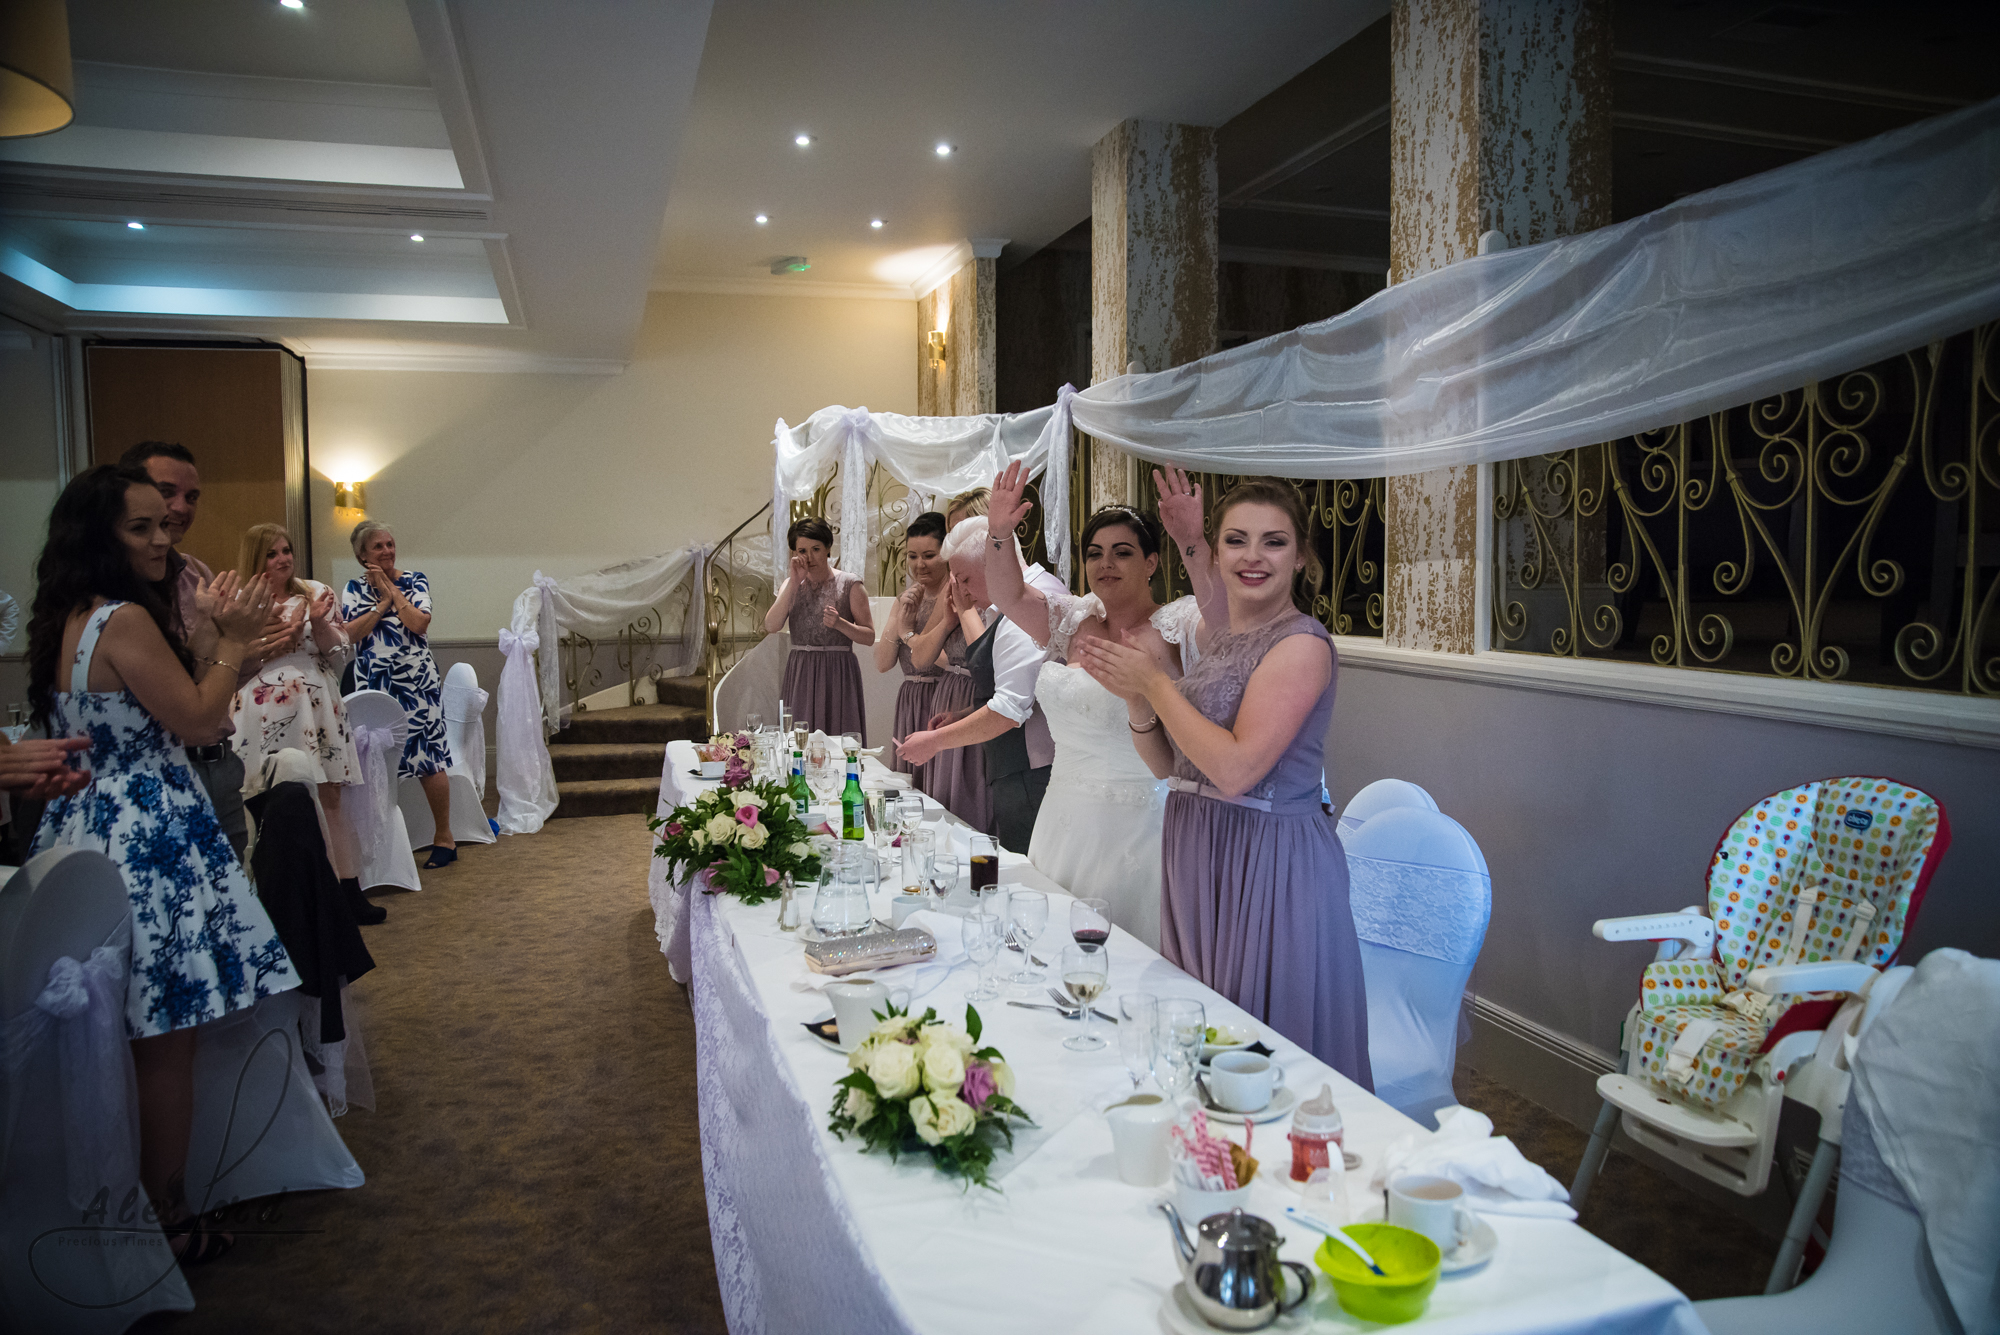 the bride and bride are welcomed into the wedding breakfast room for the start of the speeches